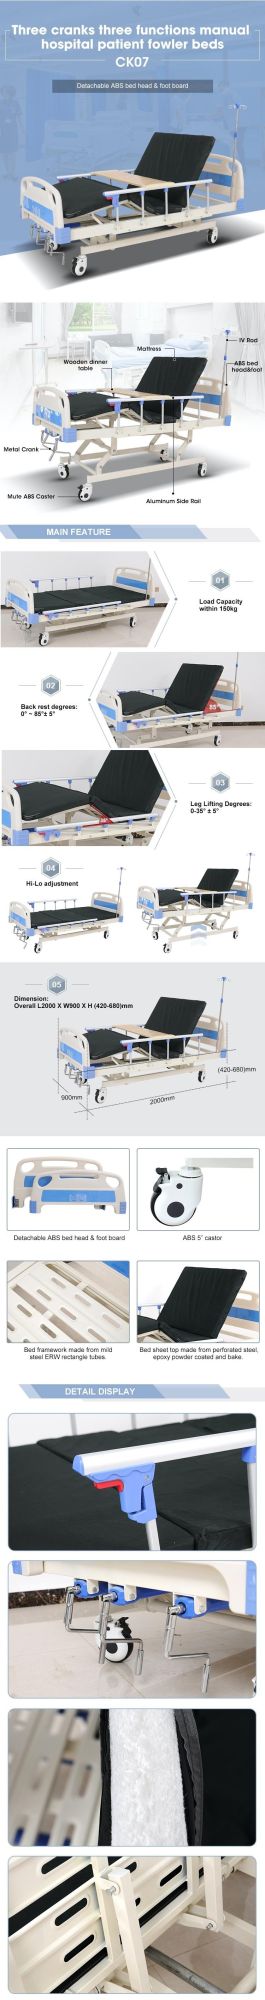 Cheap Price Adjustable Manual Three Cranks 3 Function Hospital Patient Bed Nursing Fowler Bed